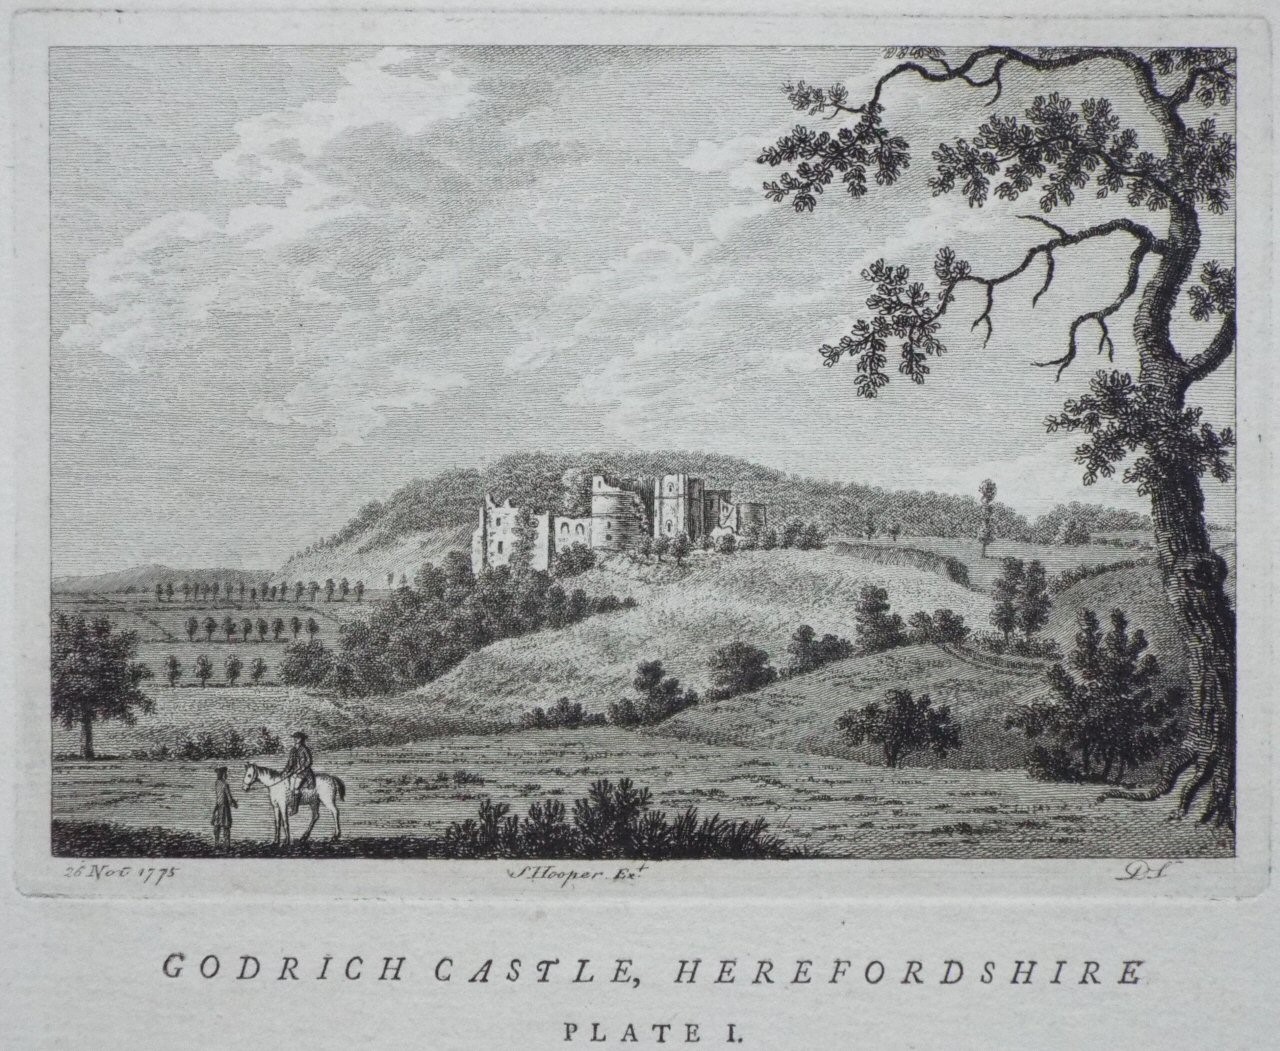 Print - Goodrich Castle, Herefordshire. Plate I - D